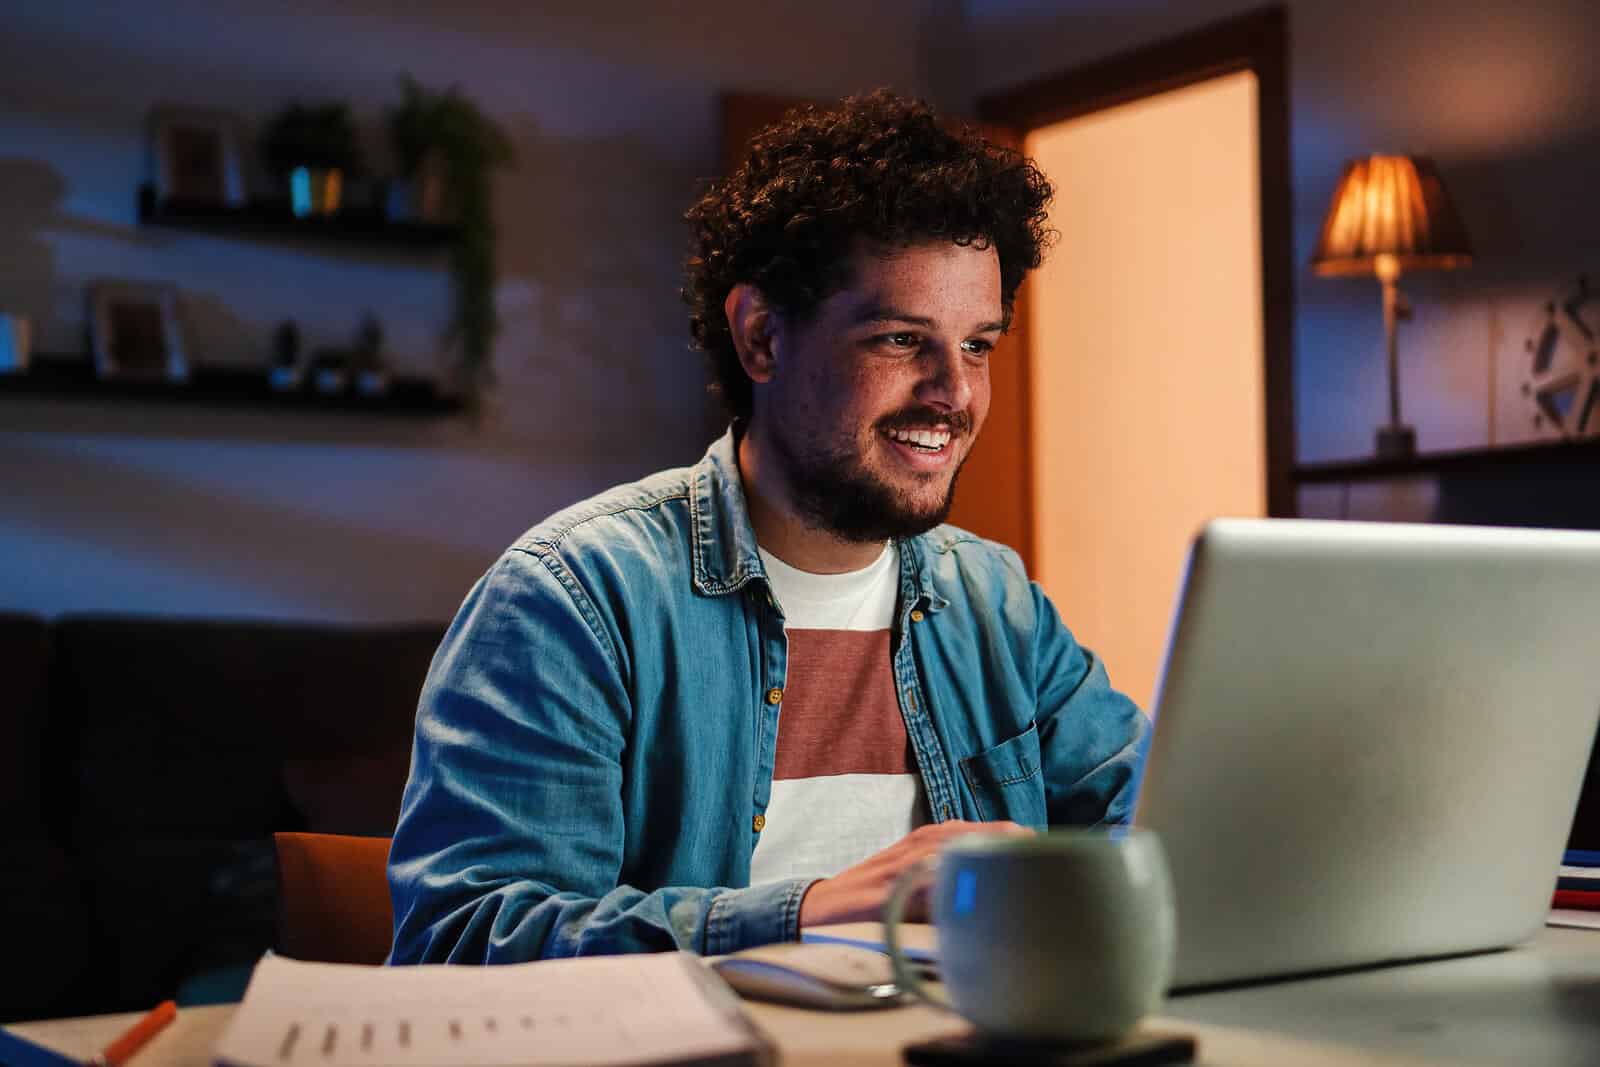 Image of a man sitting at a laptop working and smiling. Learn what SEO is and how effective it can be to boost your rankings on search engines.